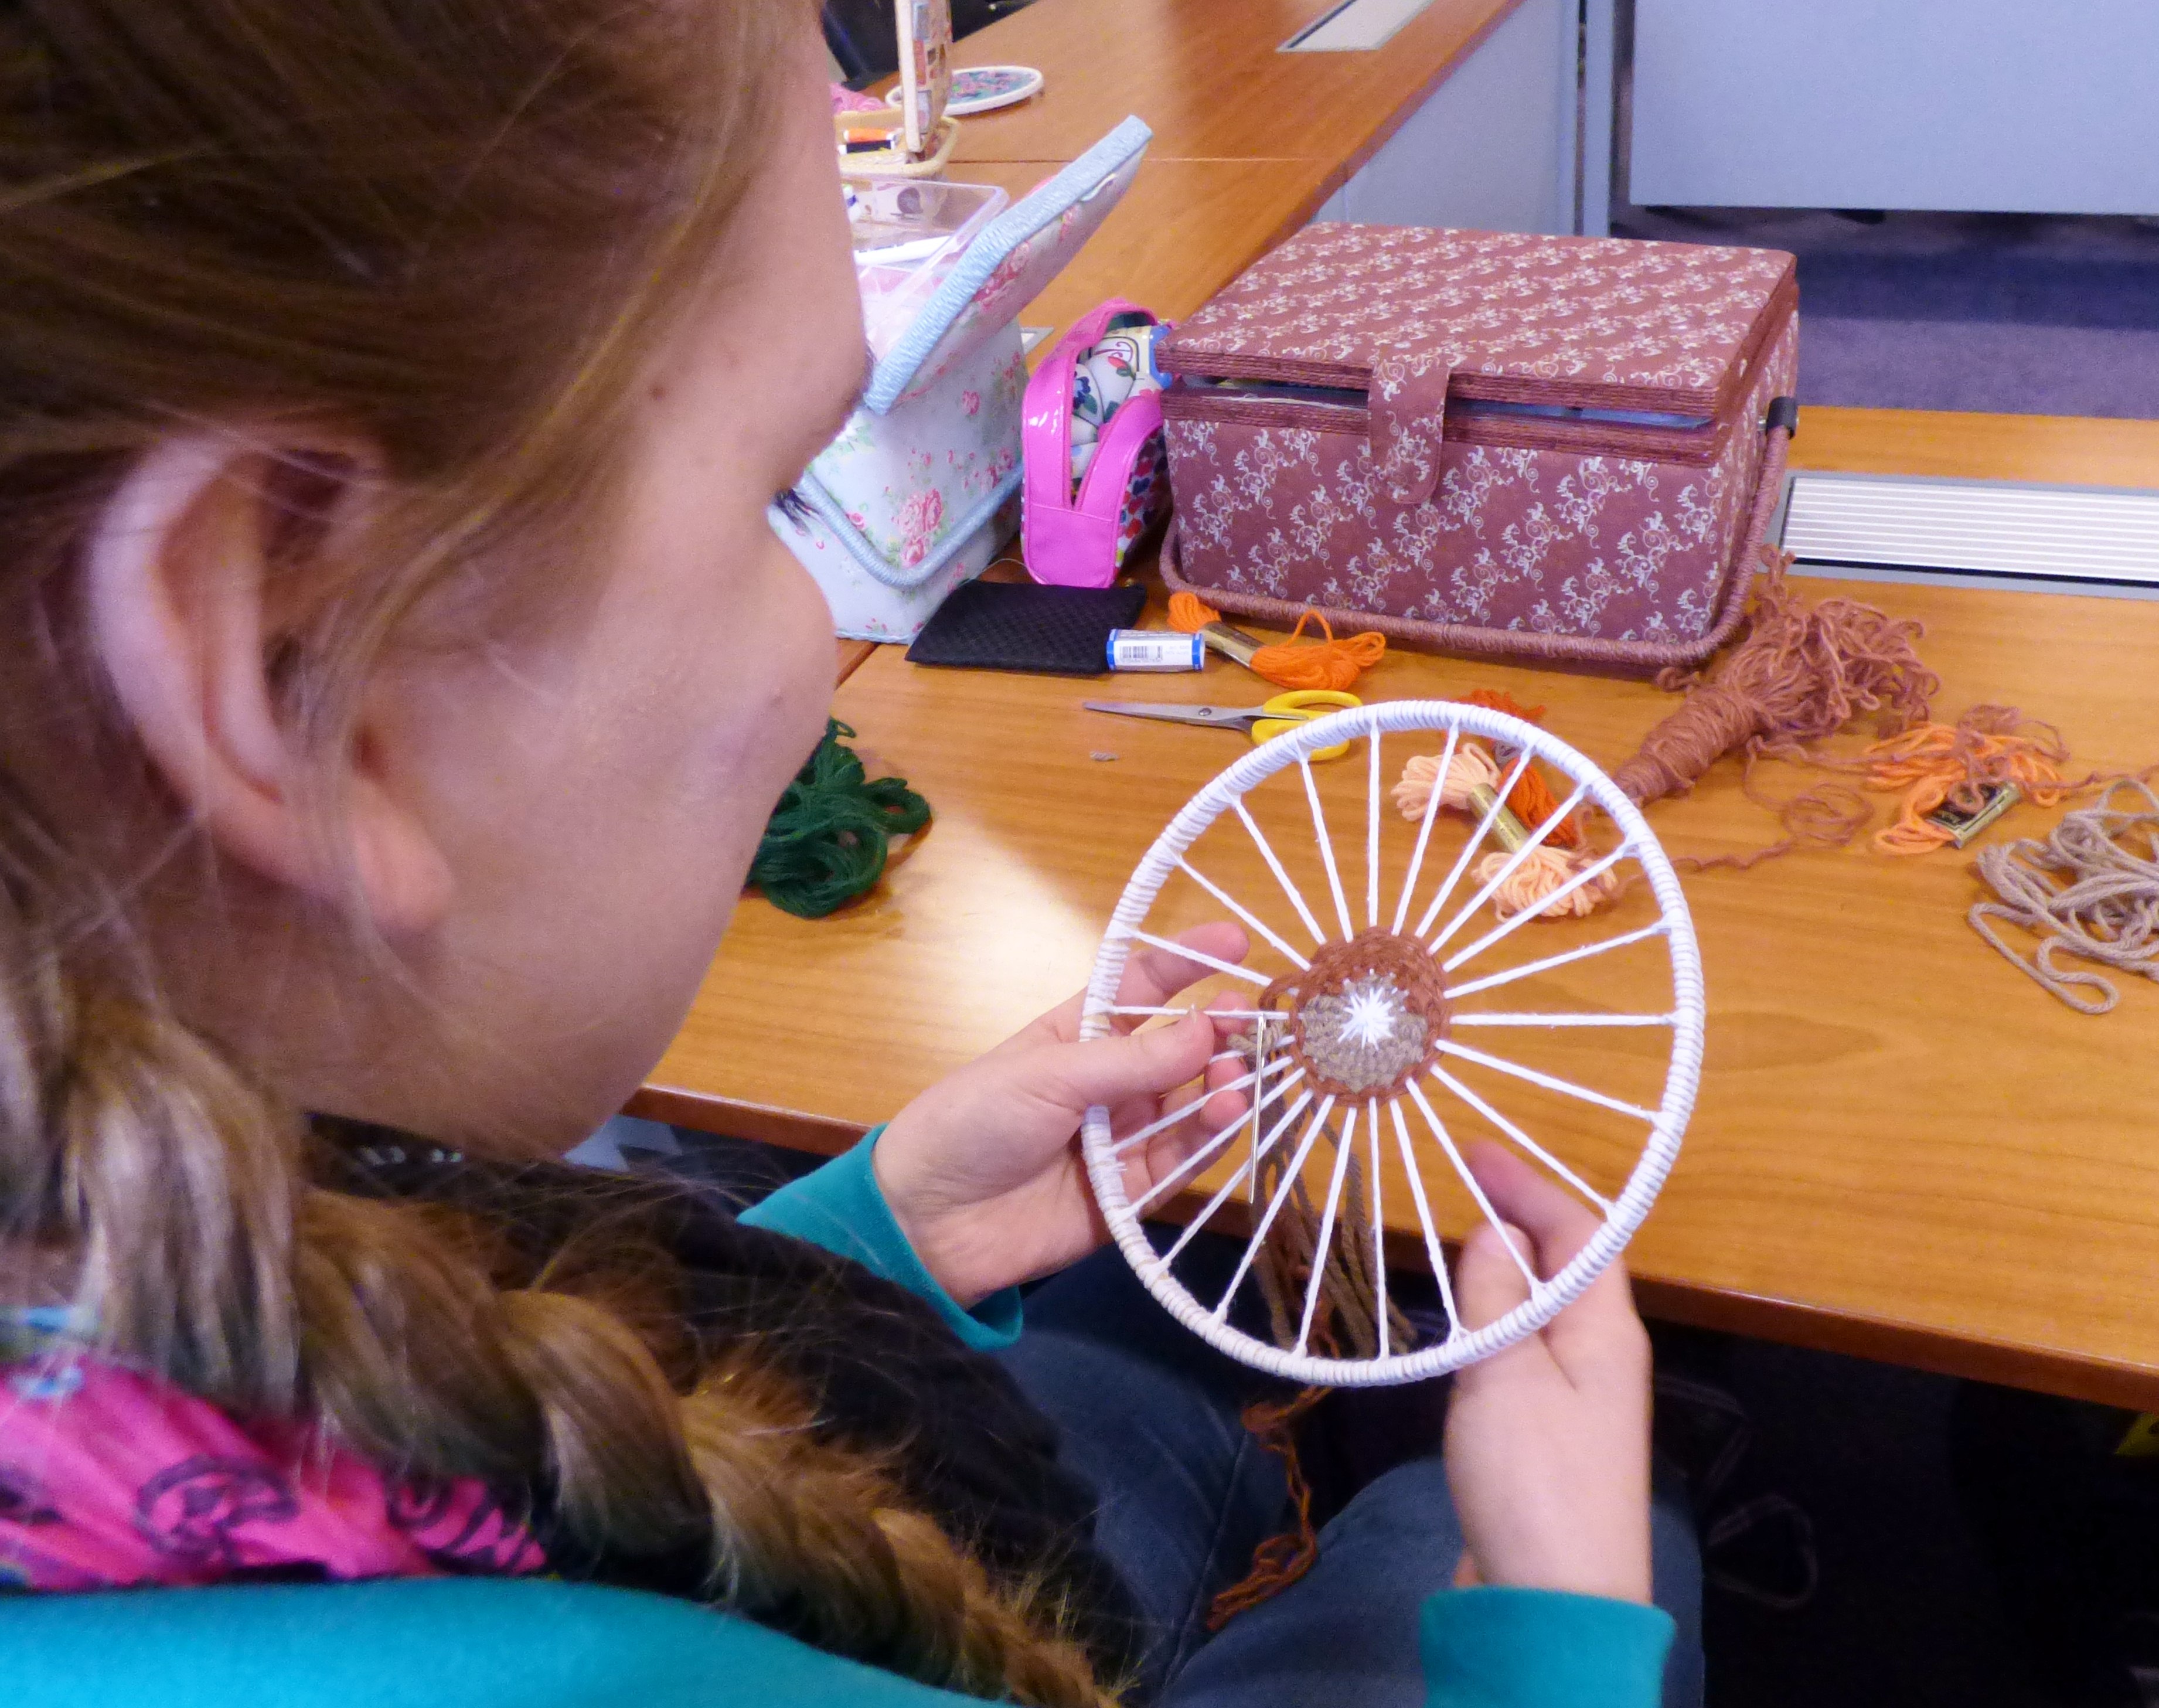 YE group are making a circular weaving with added embroidery